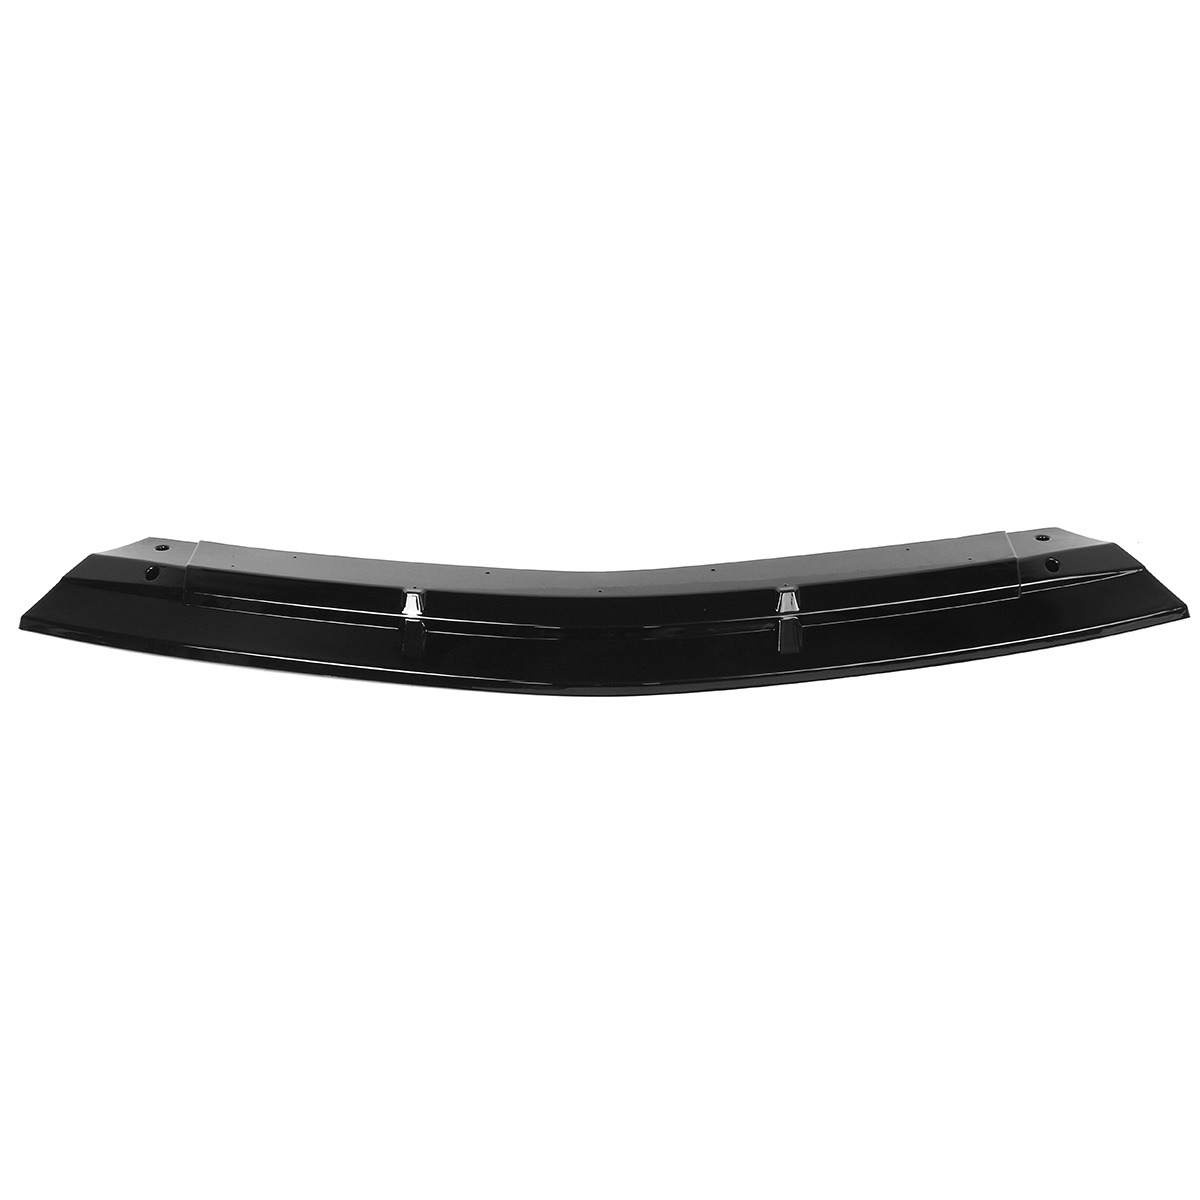 3Pcs Glossy Black Front Bumper Protector Lip Spoiler Covers Trim for Mercedes Benz Cla-Class W117 2016-2020